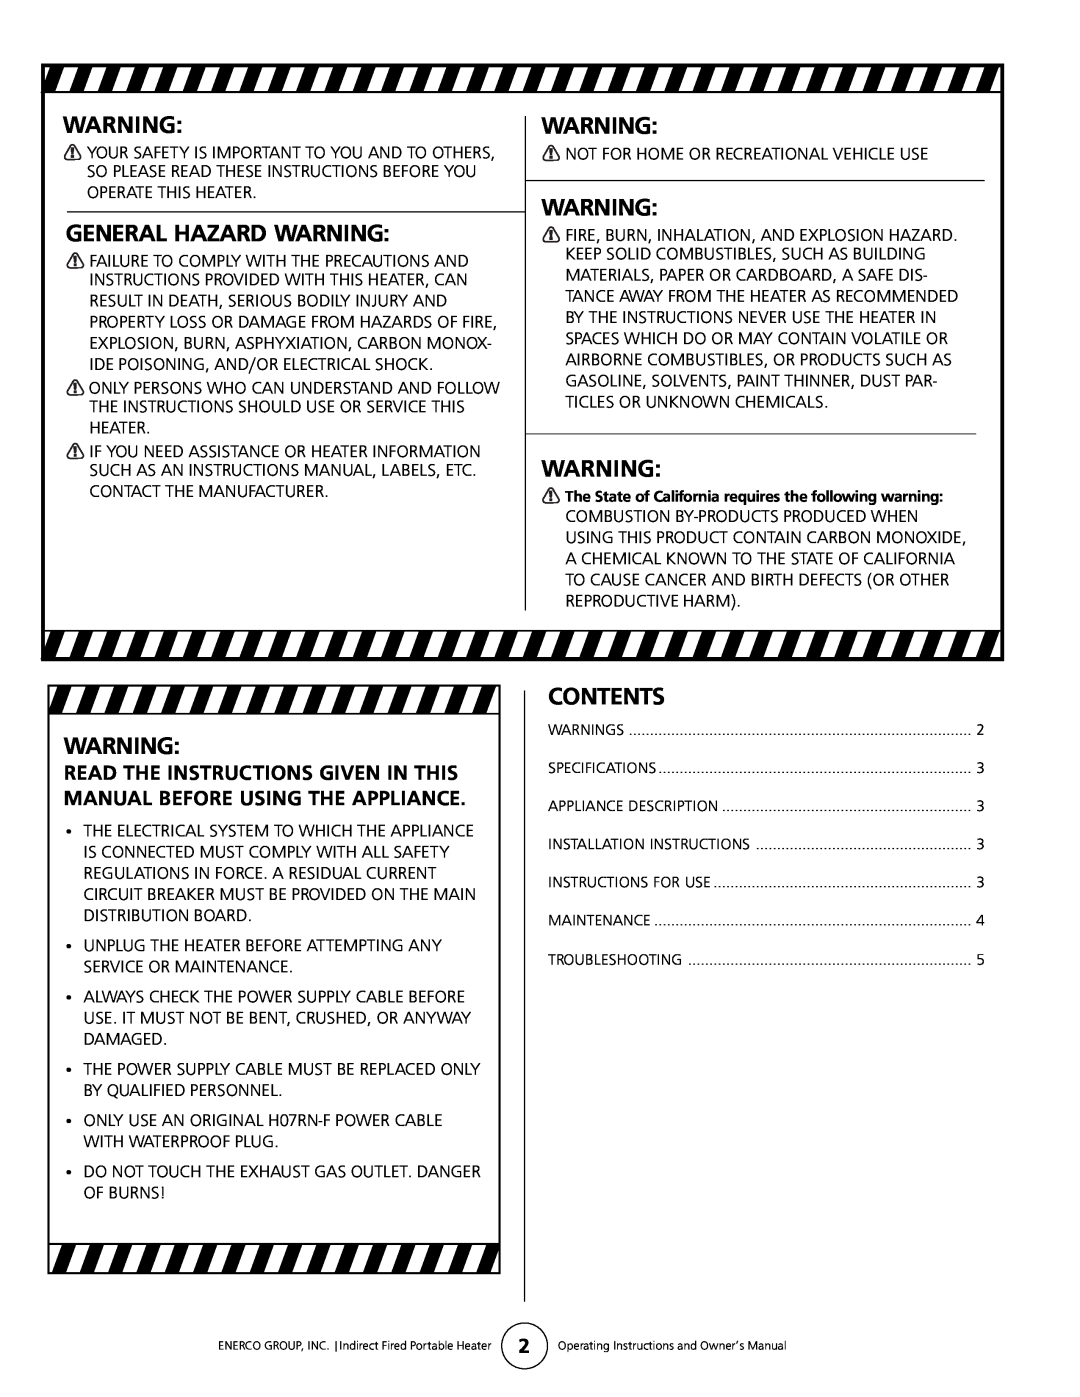 Enerco HS180ID General Hazard Warning, Contents, Read The Instructions Given In This Manual Before Using The Appliance 